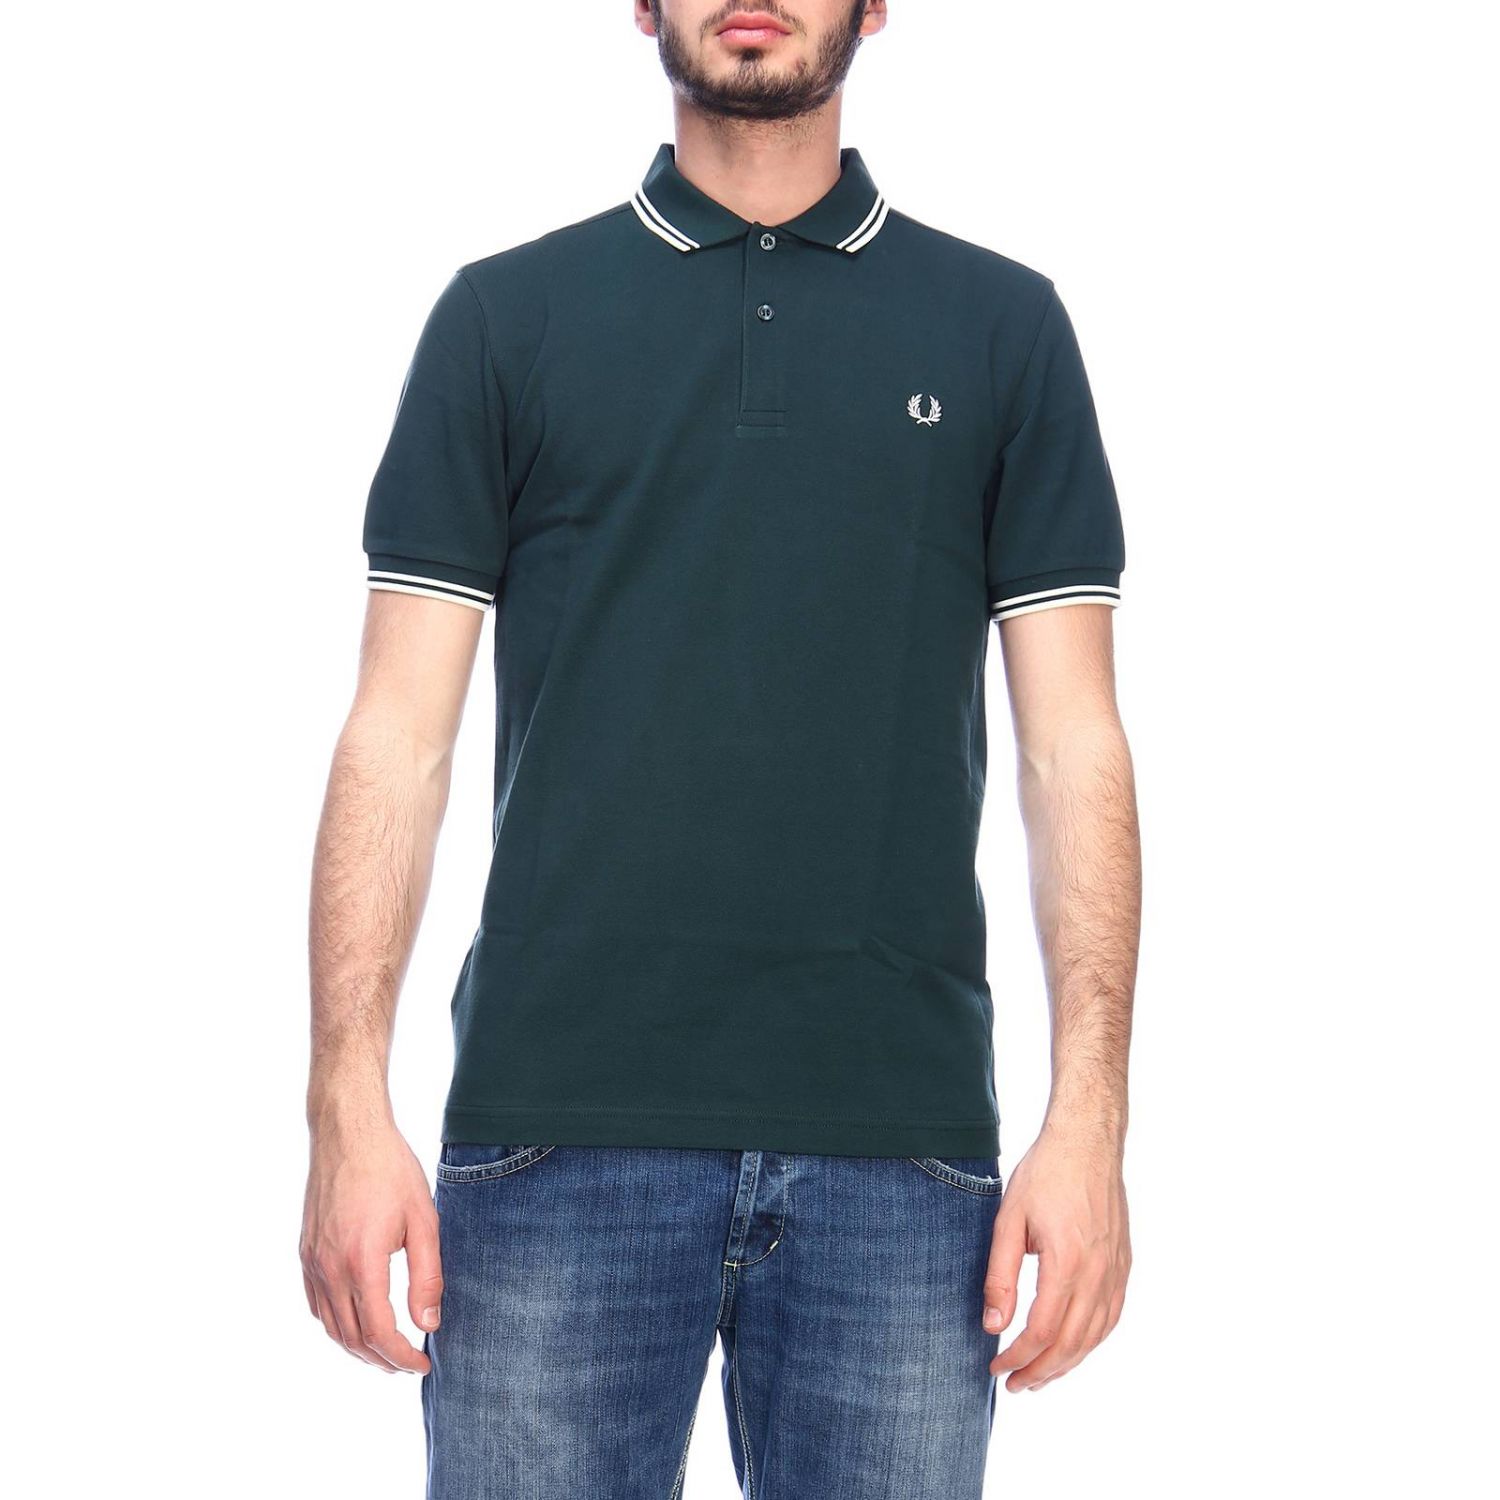 Fred Perry Outlet: t-shirt for men - Bottle Green | Fred Perry t-shirt ...